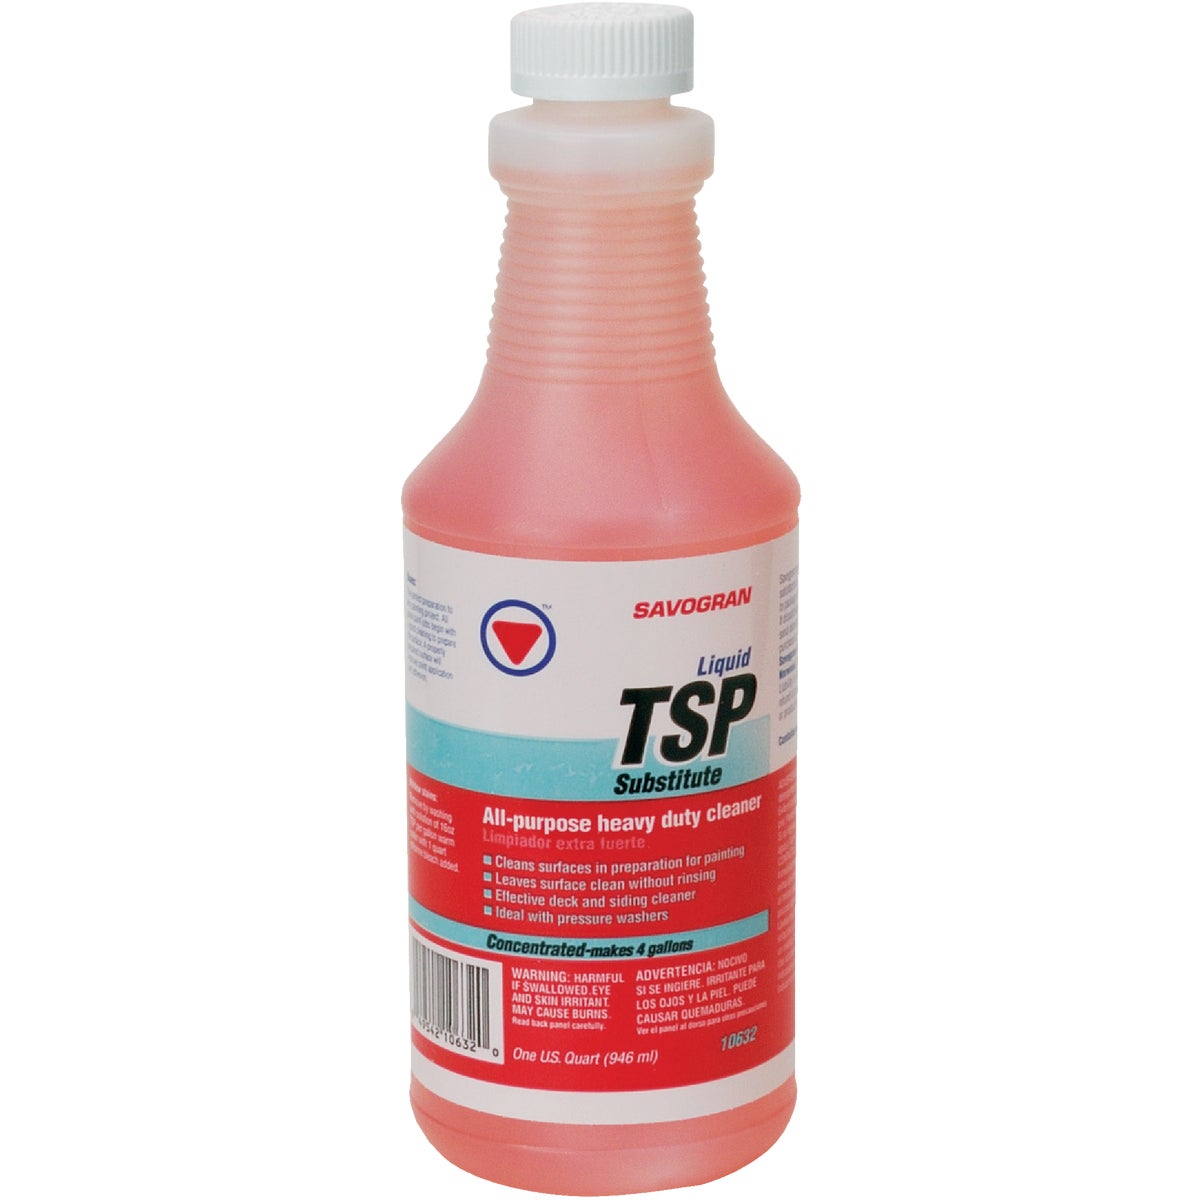 Item 783569, Heavy-duty all-purpose phosphate-free cleaner that cuts through heavy 